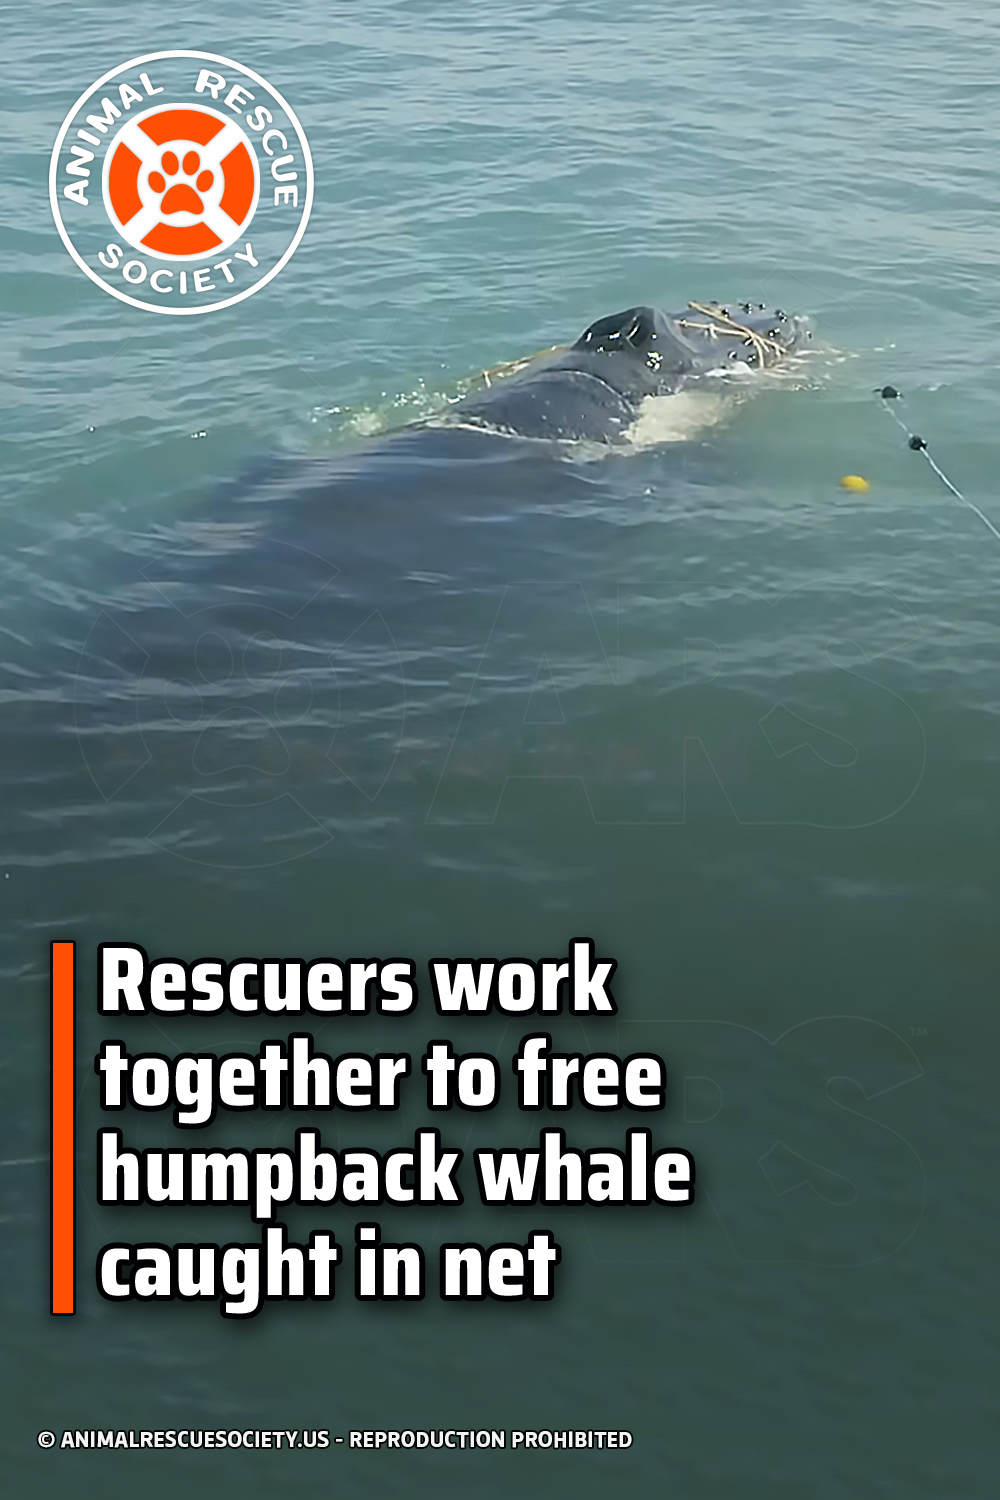 Rescuers work together to free humpback whale caught in net